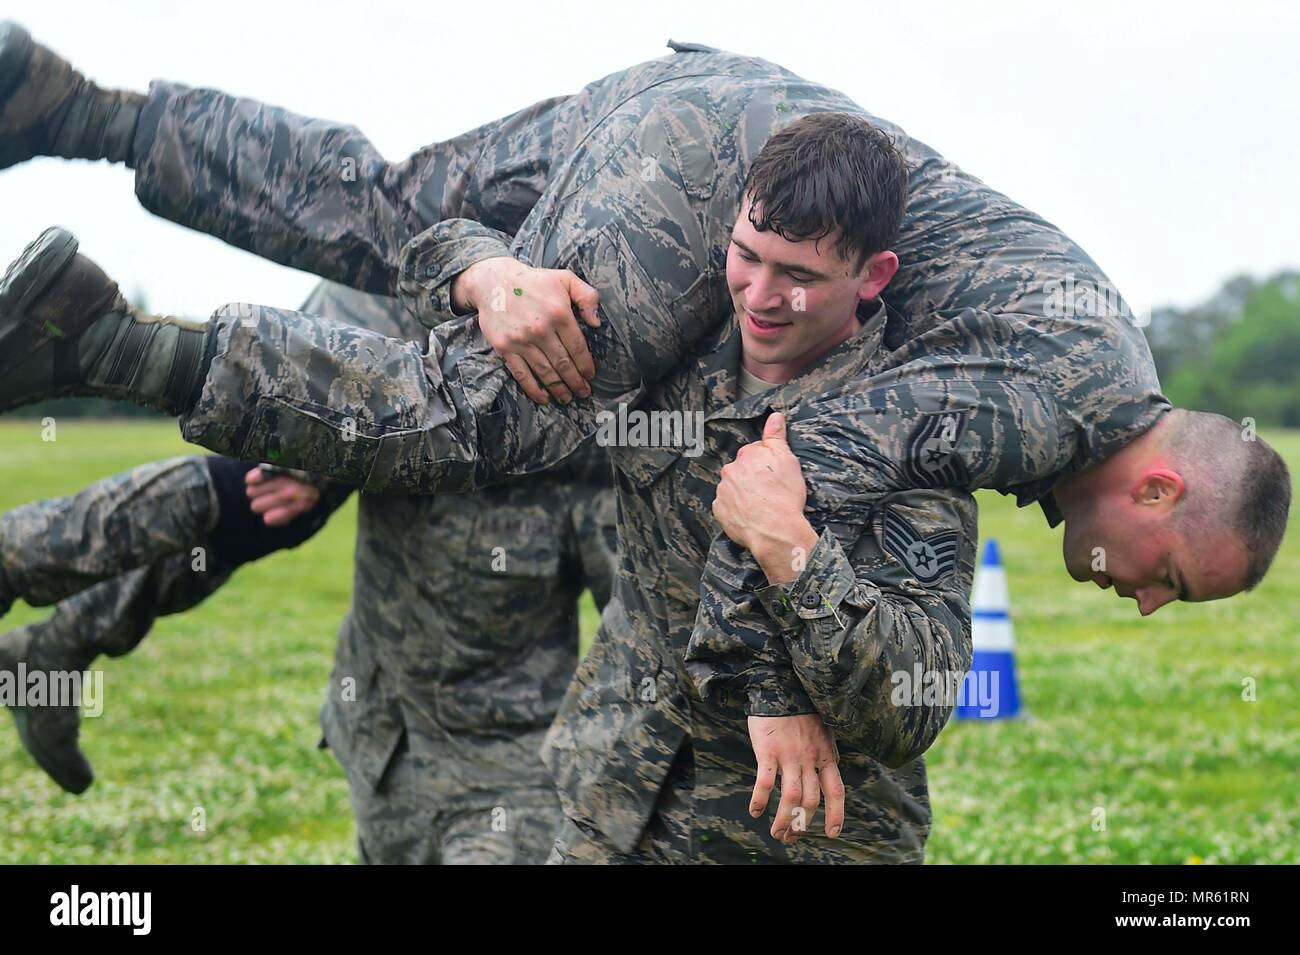 U.S. Air Force Staff Sgt. Gary Good, 633rd Security Forces Squadron unit trainer, performs a buddy carry during a modified Marine Combat Fitness Test at Joint Base Langley-Eustis, Va., April 28, 2017. During the modified Marine Combat Physical Test, Good and his fellow members of the 633rd SFS Emergency Services Team performed a low crawl, high crawl and a fireman carry. (U.S. Air Force photo/Senior Airman Derek Seifert Stock Photo